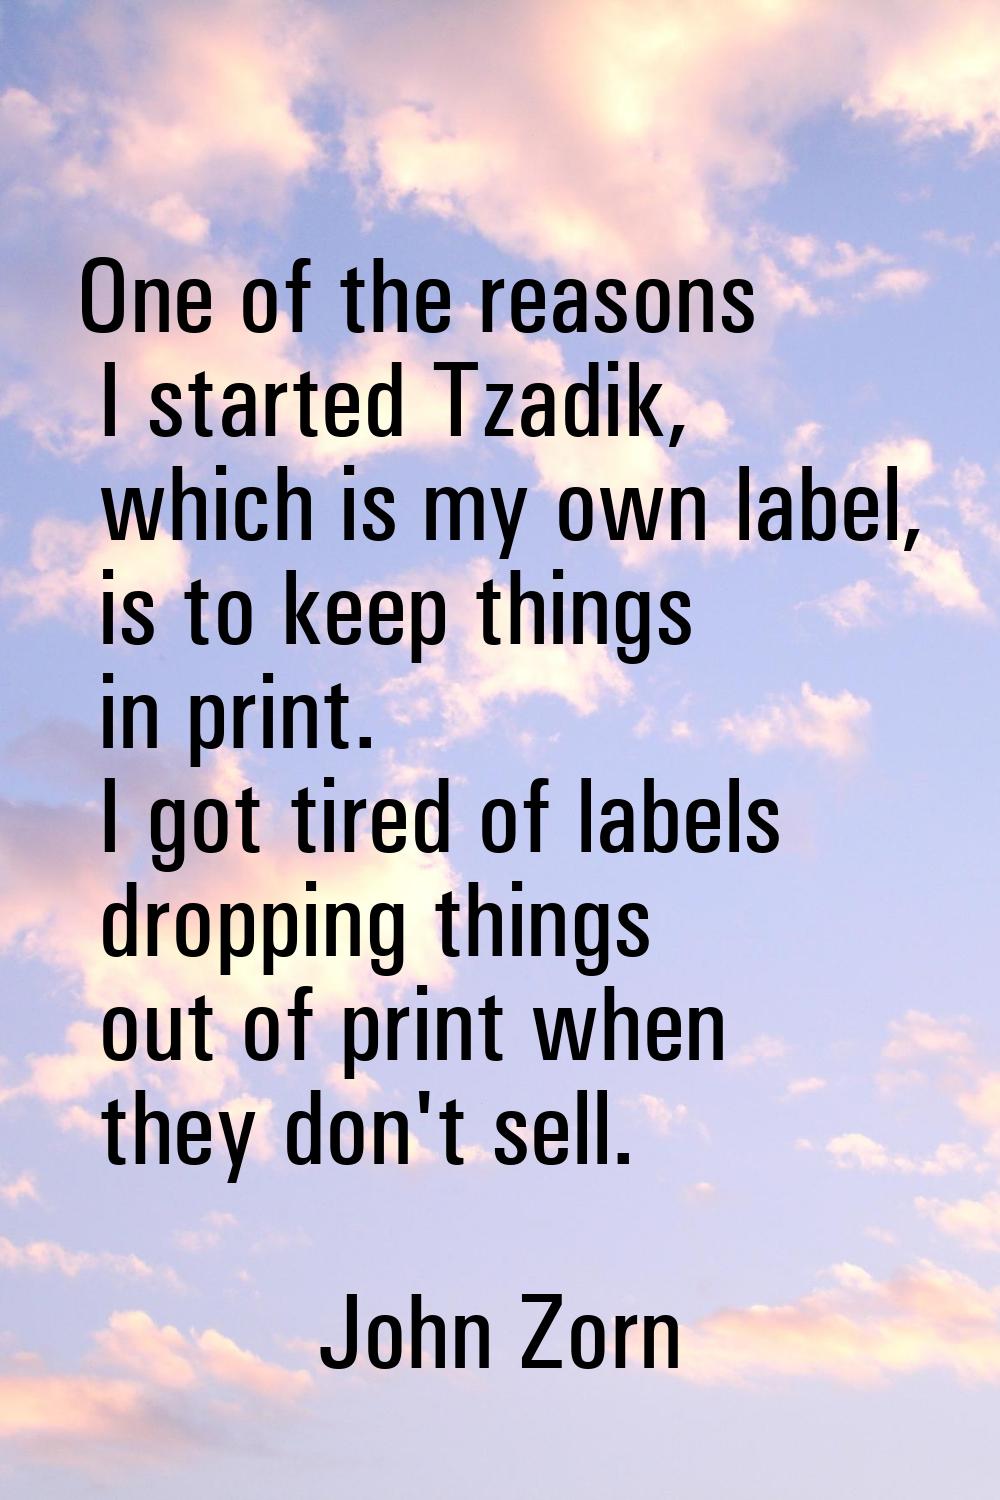 One of the reasons I started Tzadik, which is my own label, is to keep things in print. I got tired